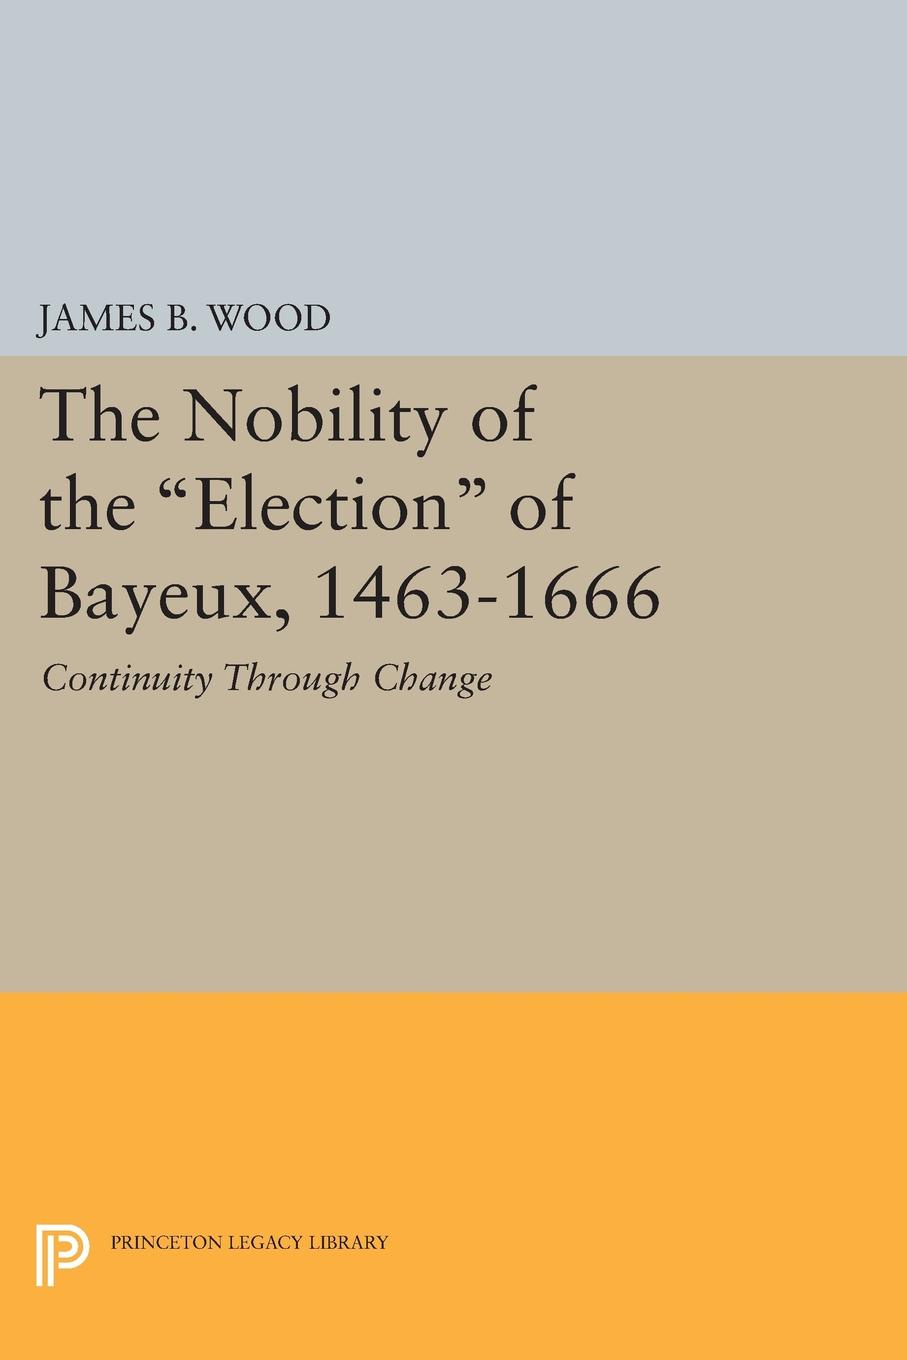 The Nobility of the Election of Bayeux, 1463-1666. Continuity Through Change